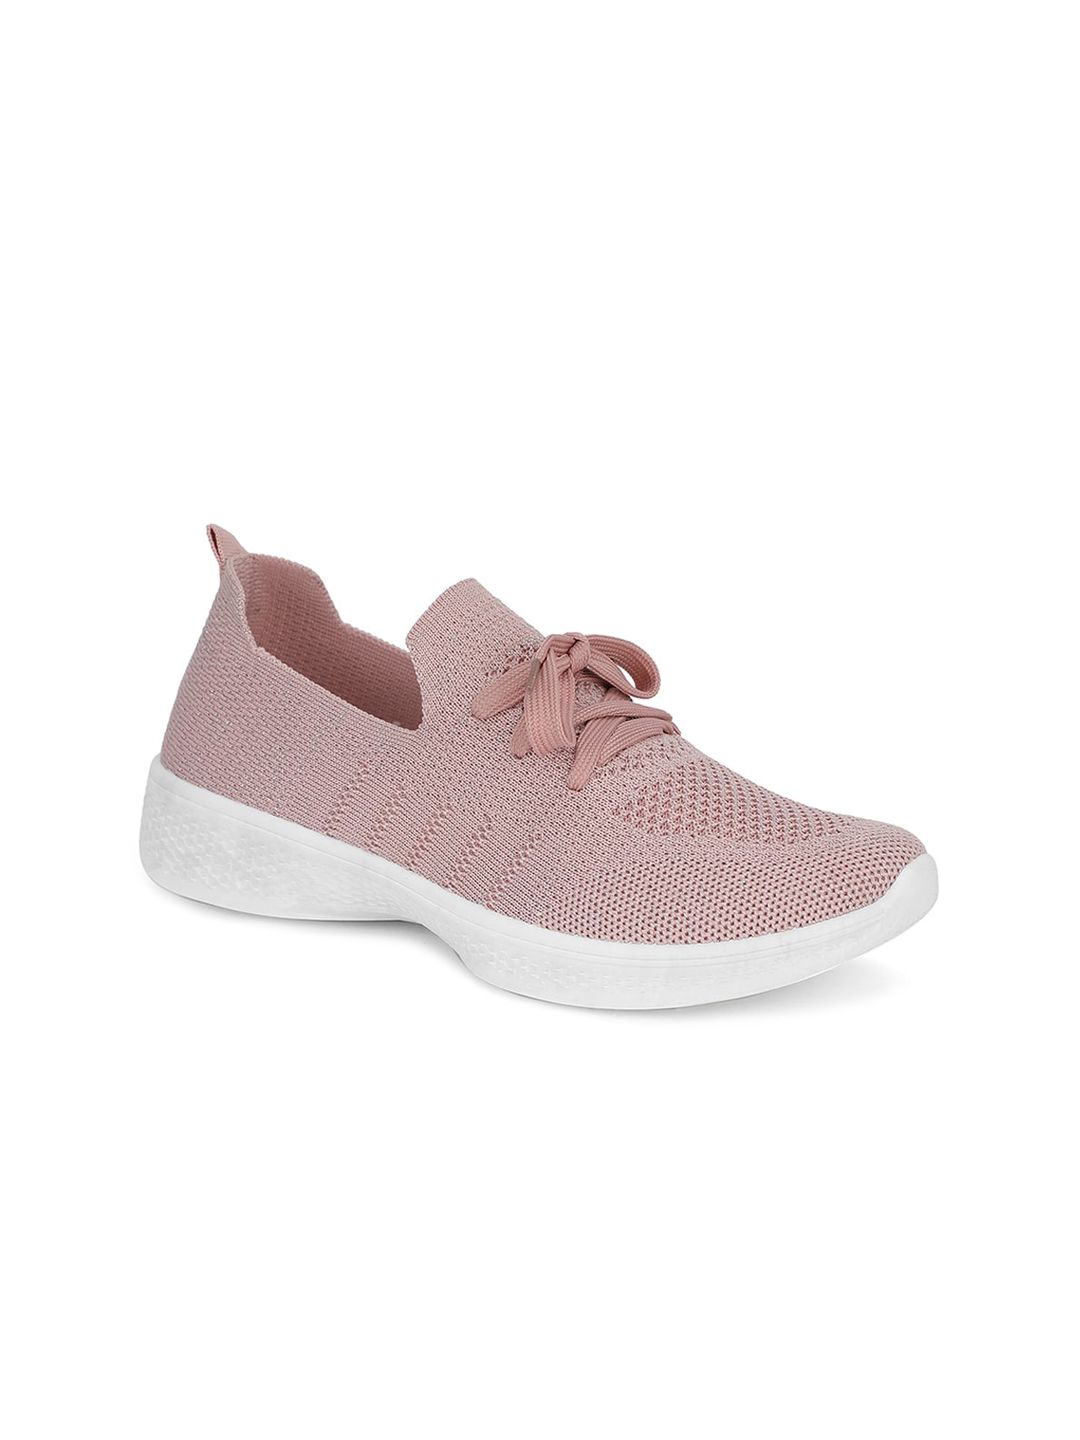 Khadims Woman Pink Woven Design Slip-On Sneakers Price in India